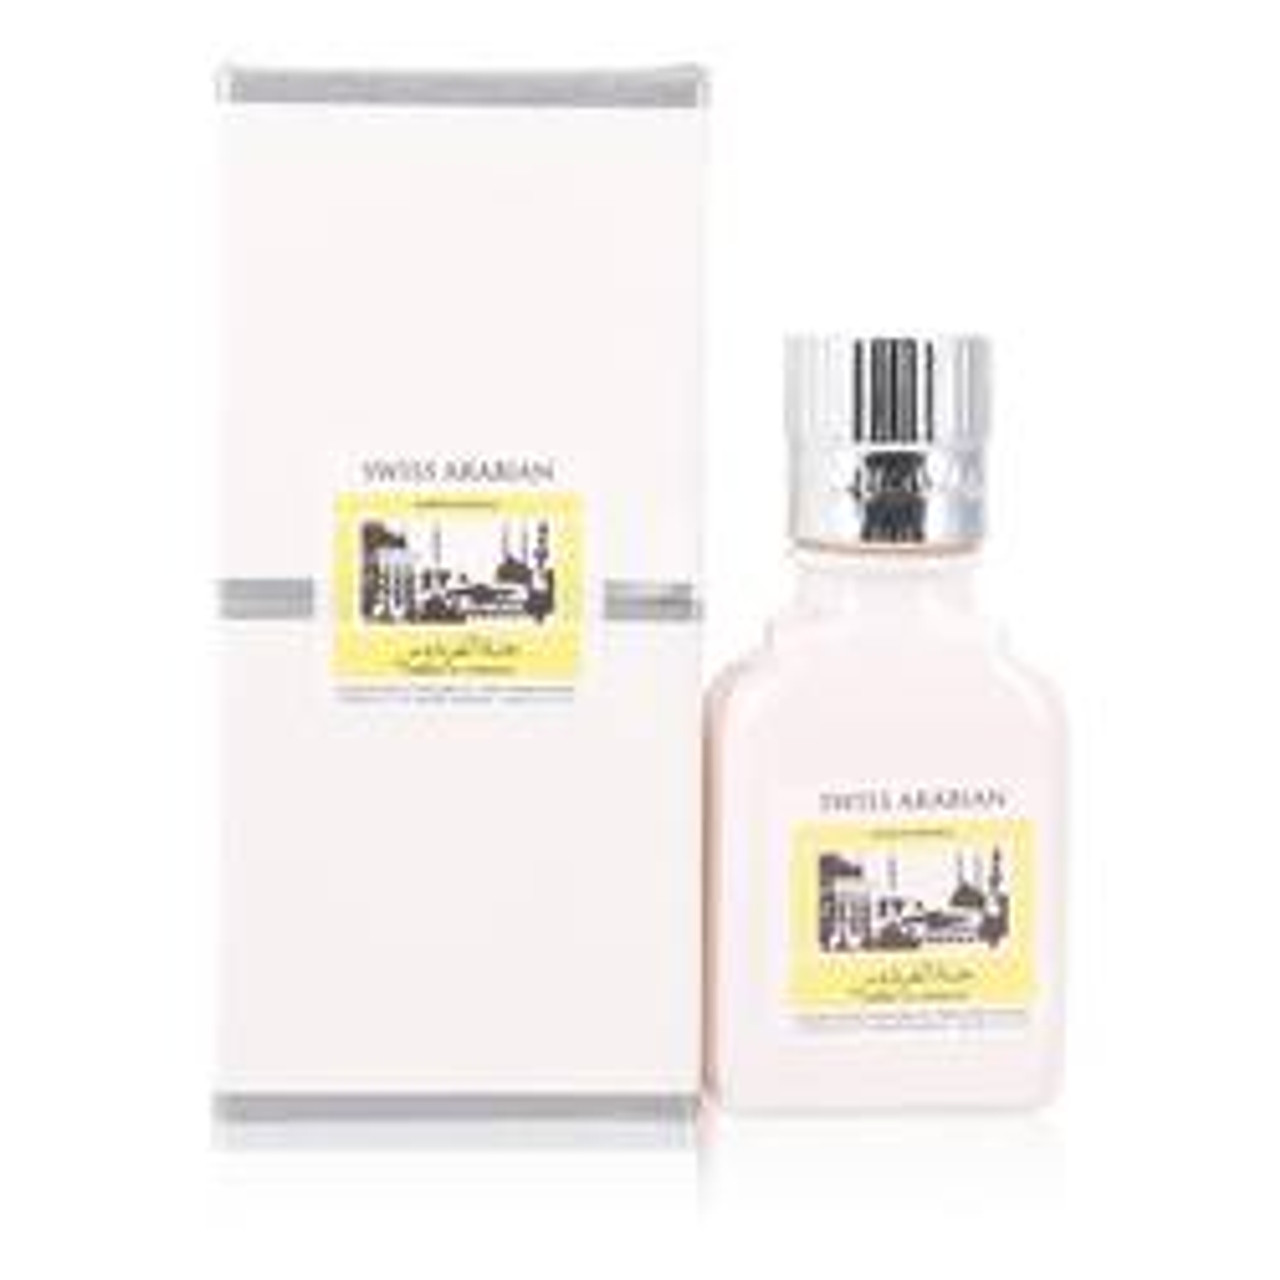 Jannet El Firdaus Cologne By Swiss Arabian Concentrated Perfume Oil Free From Alcohol (Unisex White Atta 0.3 oz for Men - [From 67.00 - Choose pk Qty ] - *Ships from Miami